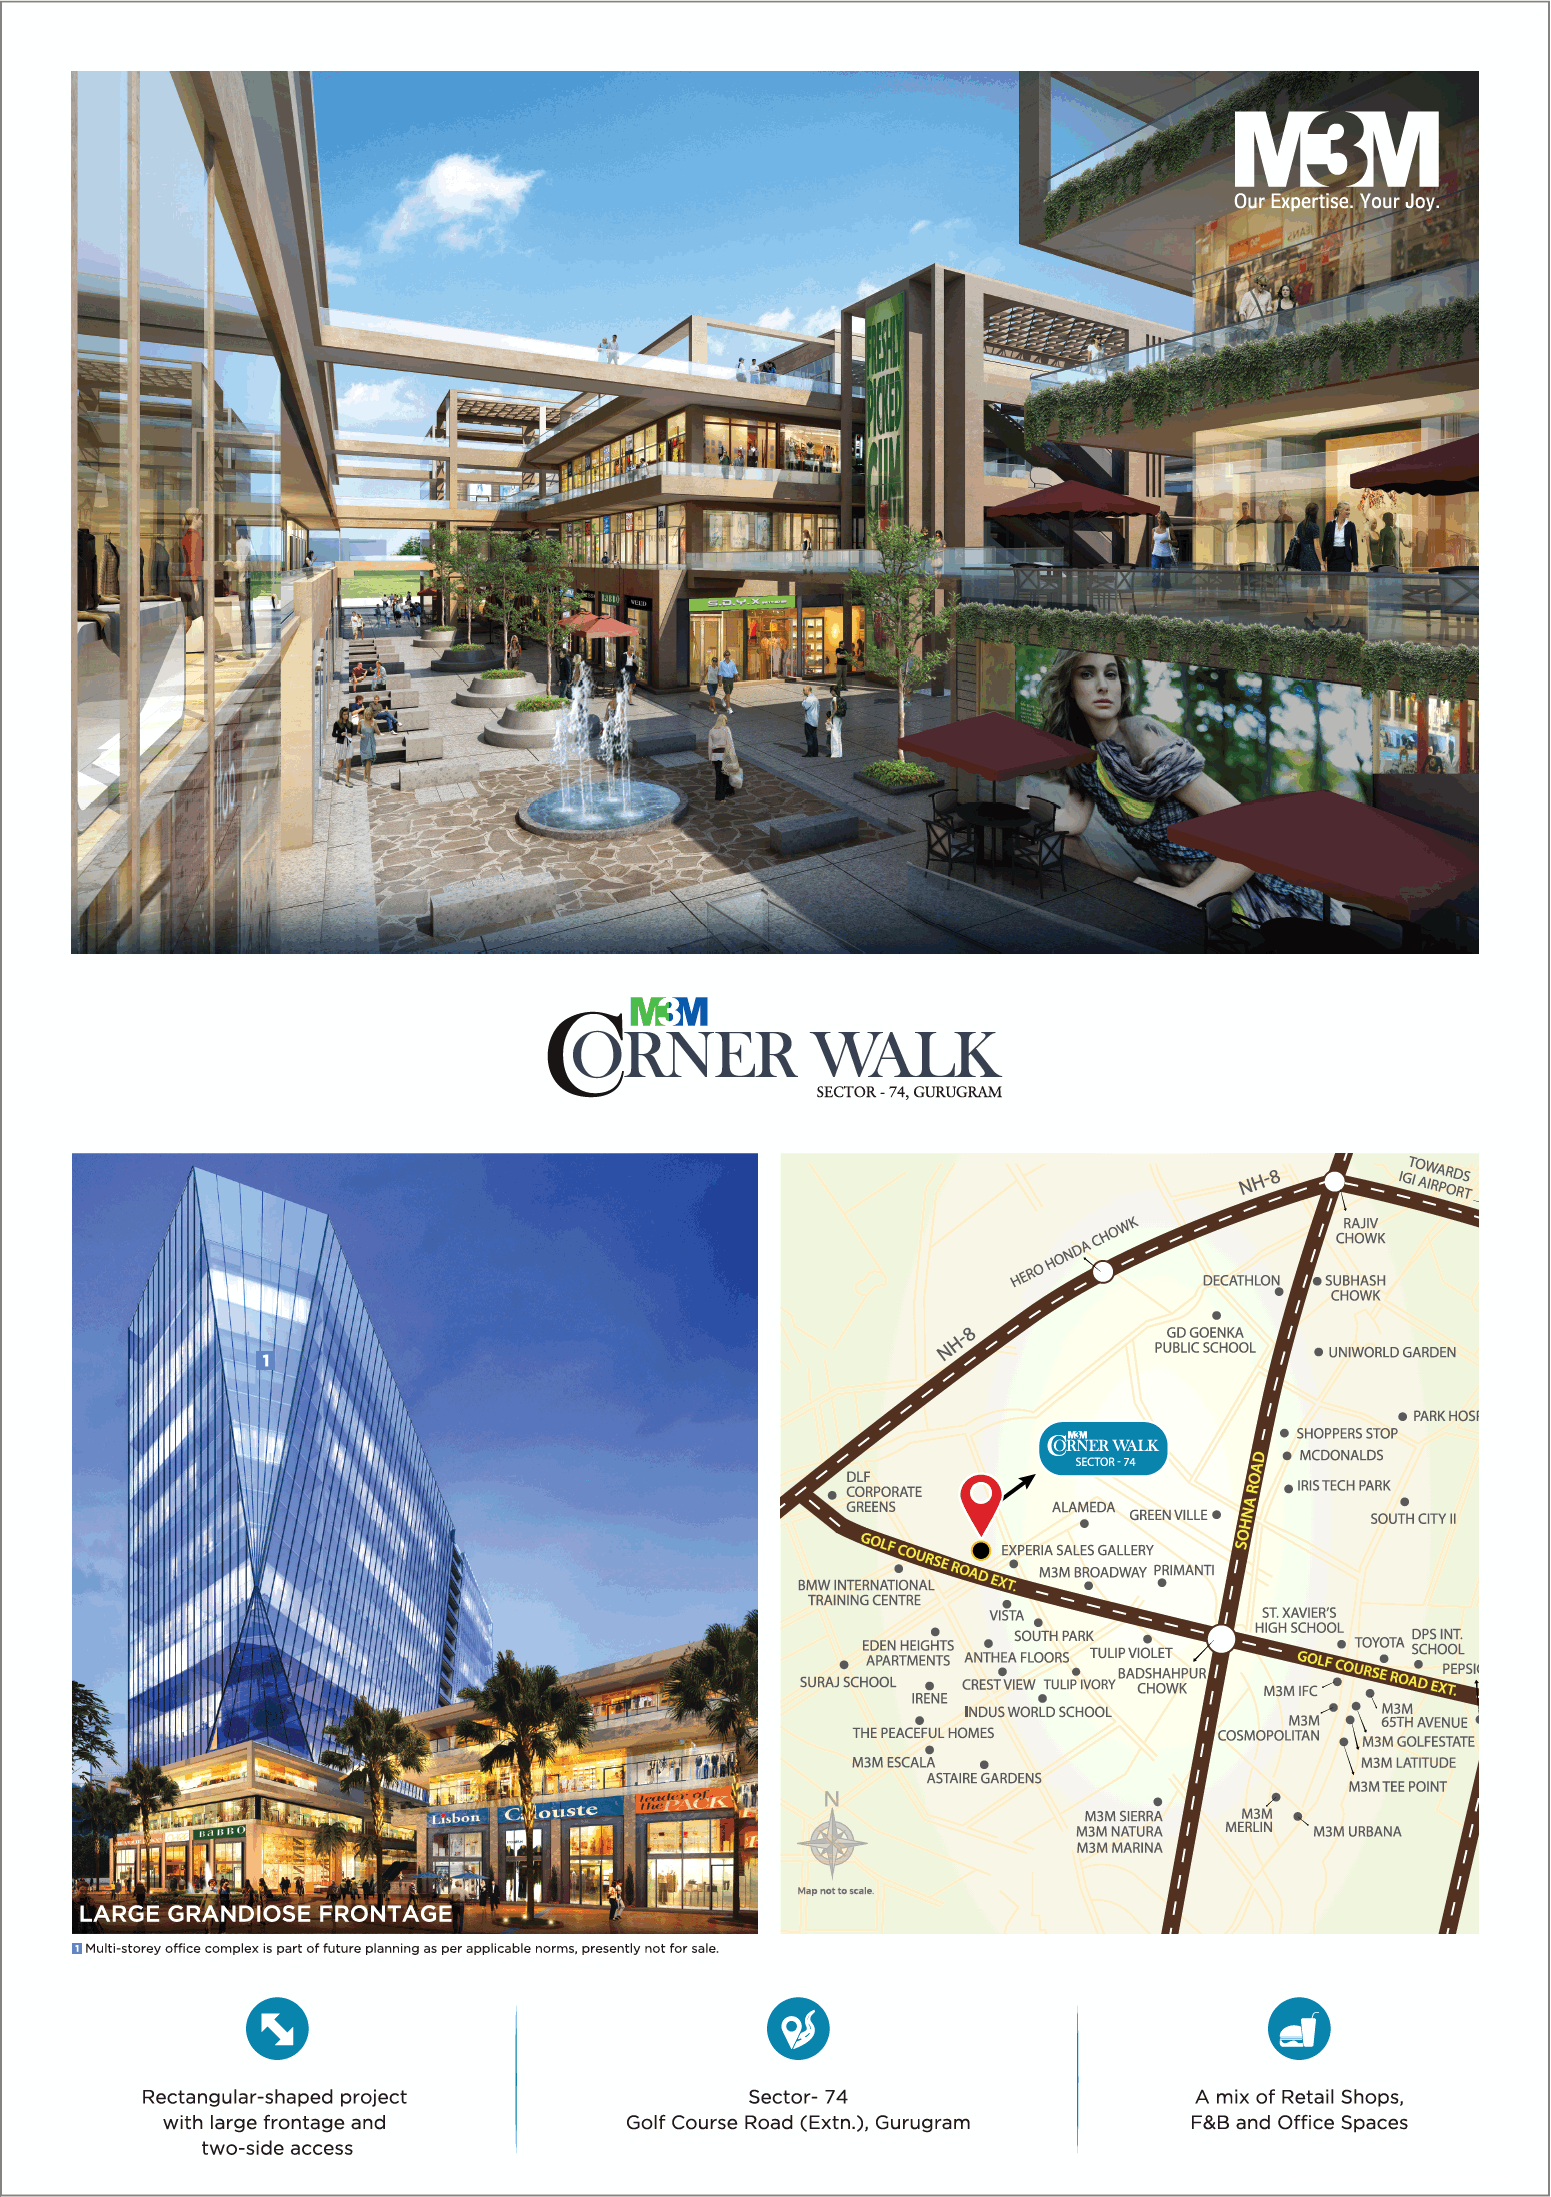 Book a mix of retail space, f&b and office spaces at M3M Corner Walk in Gurgaon Update